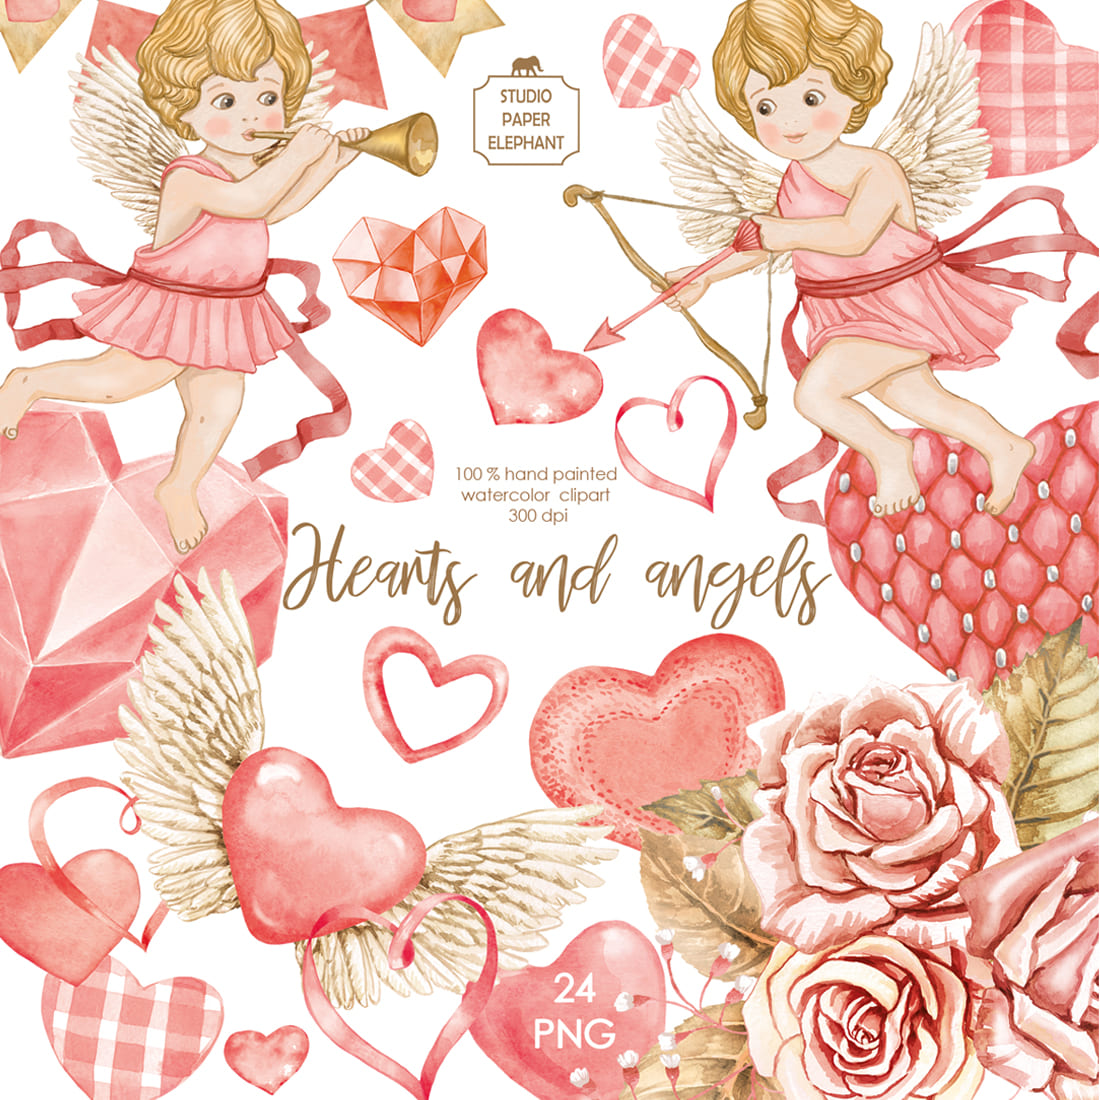 Watercolor Hearts and Angels Valentine's Day Clip art Valentine's Day Clipart Valentine's Day Postcard DIY Scrapbooking cover image.